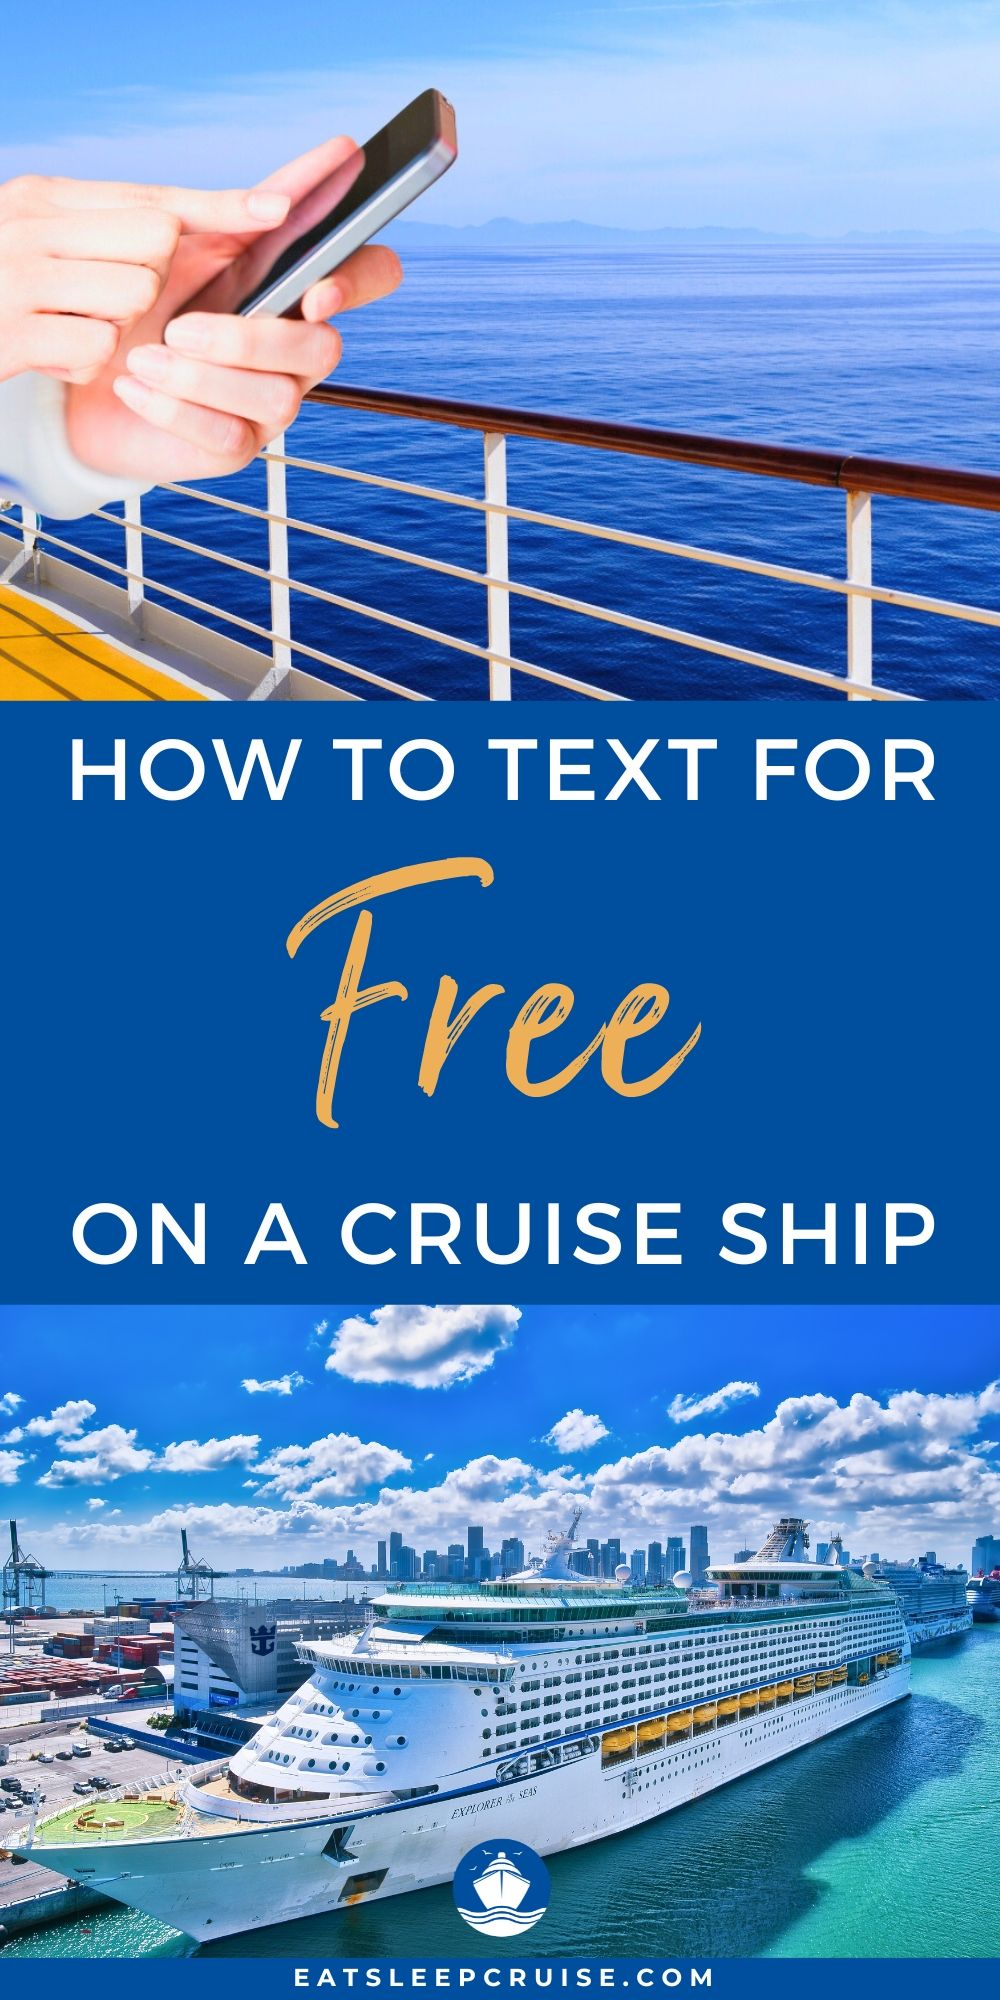 How to Text on a Cruise Ship for Free